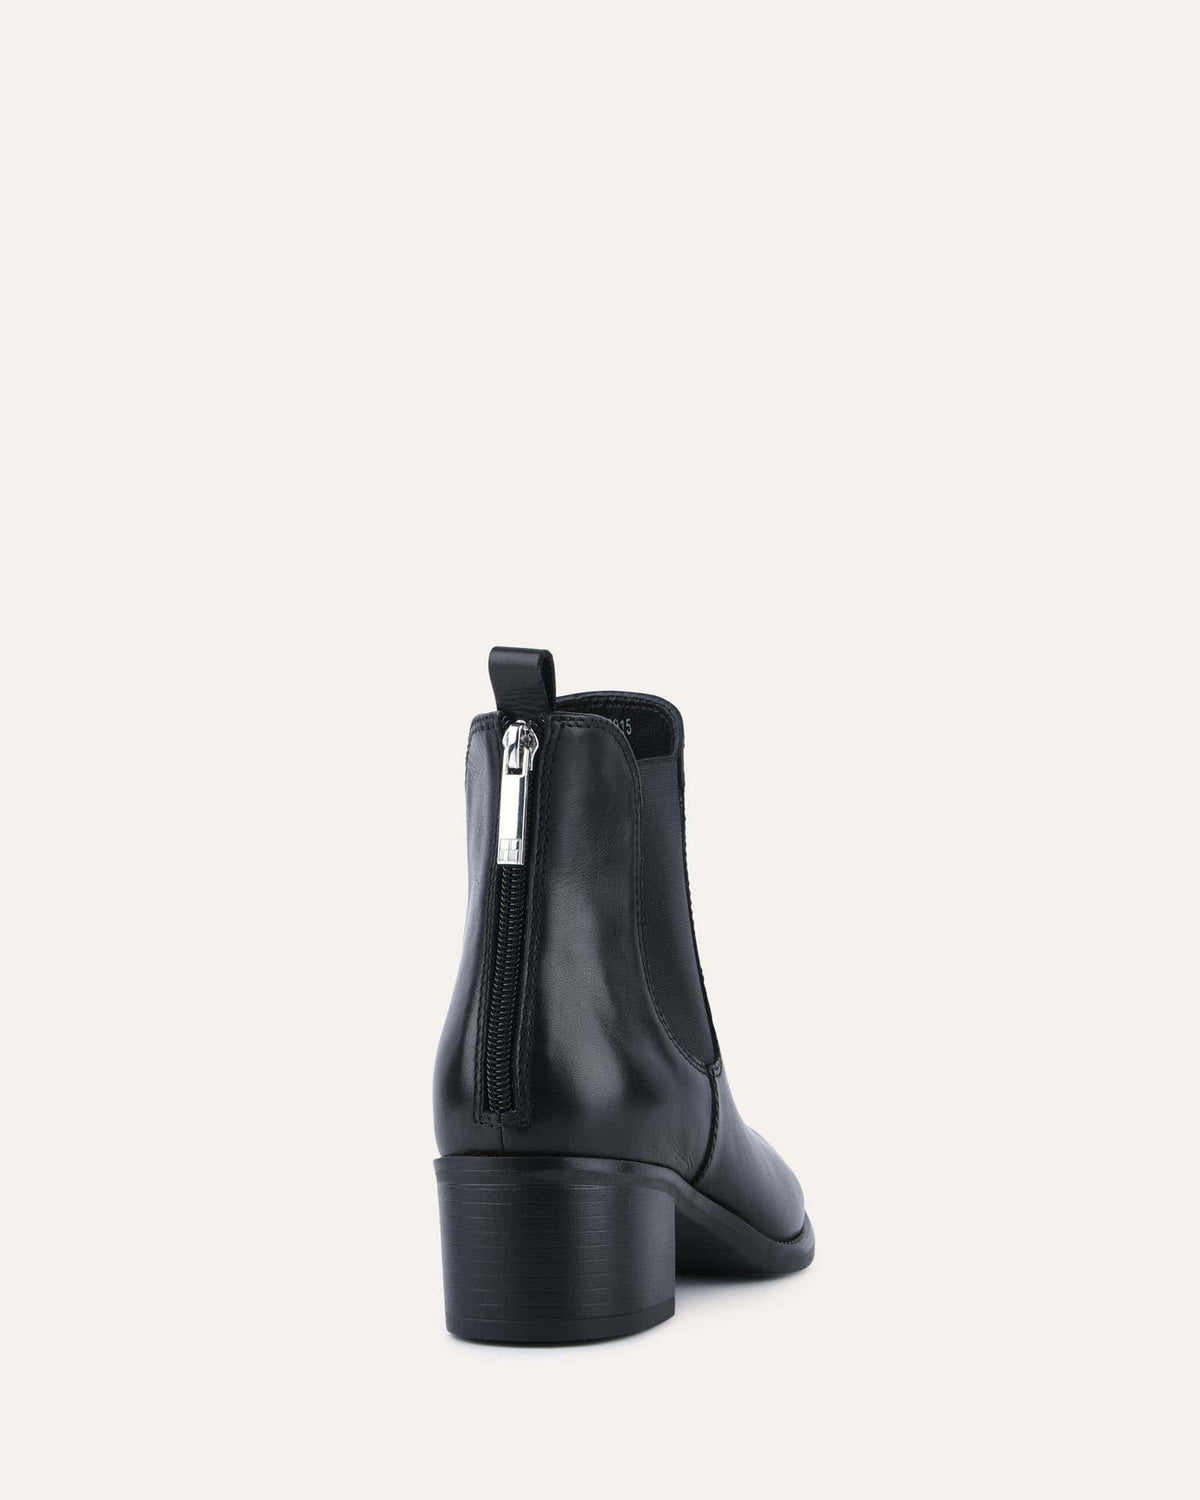 CLAIRE MID ANKLE BOOTS BLACK LEATHER